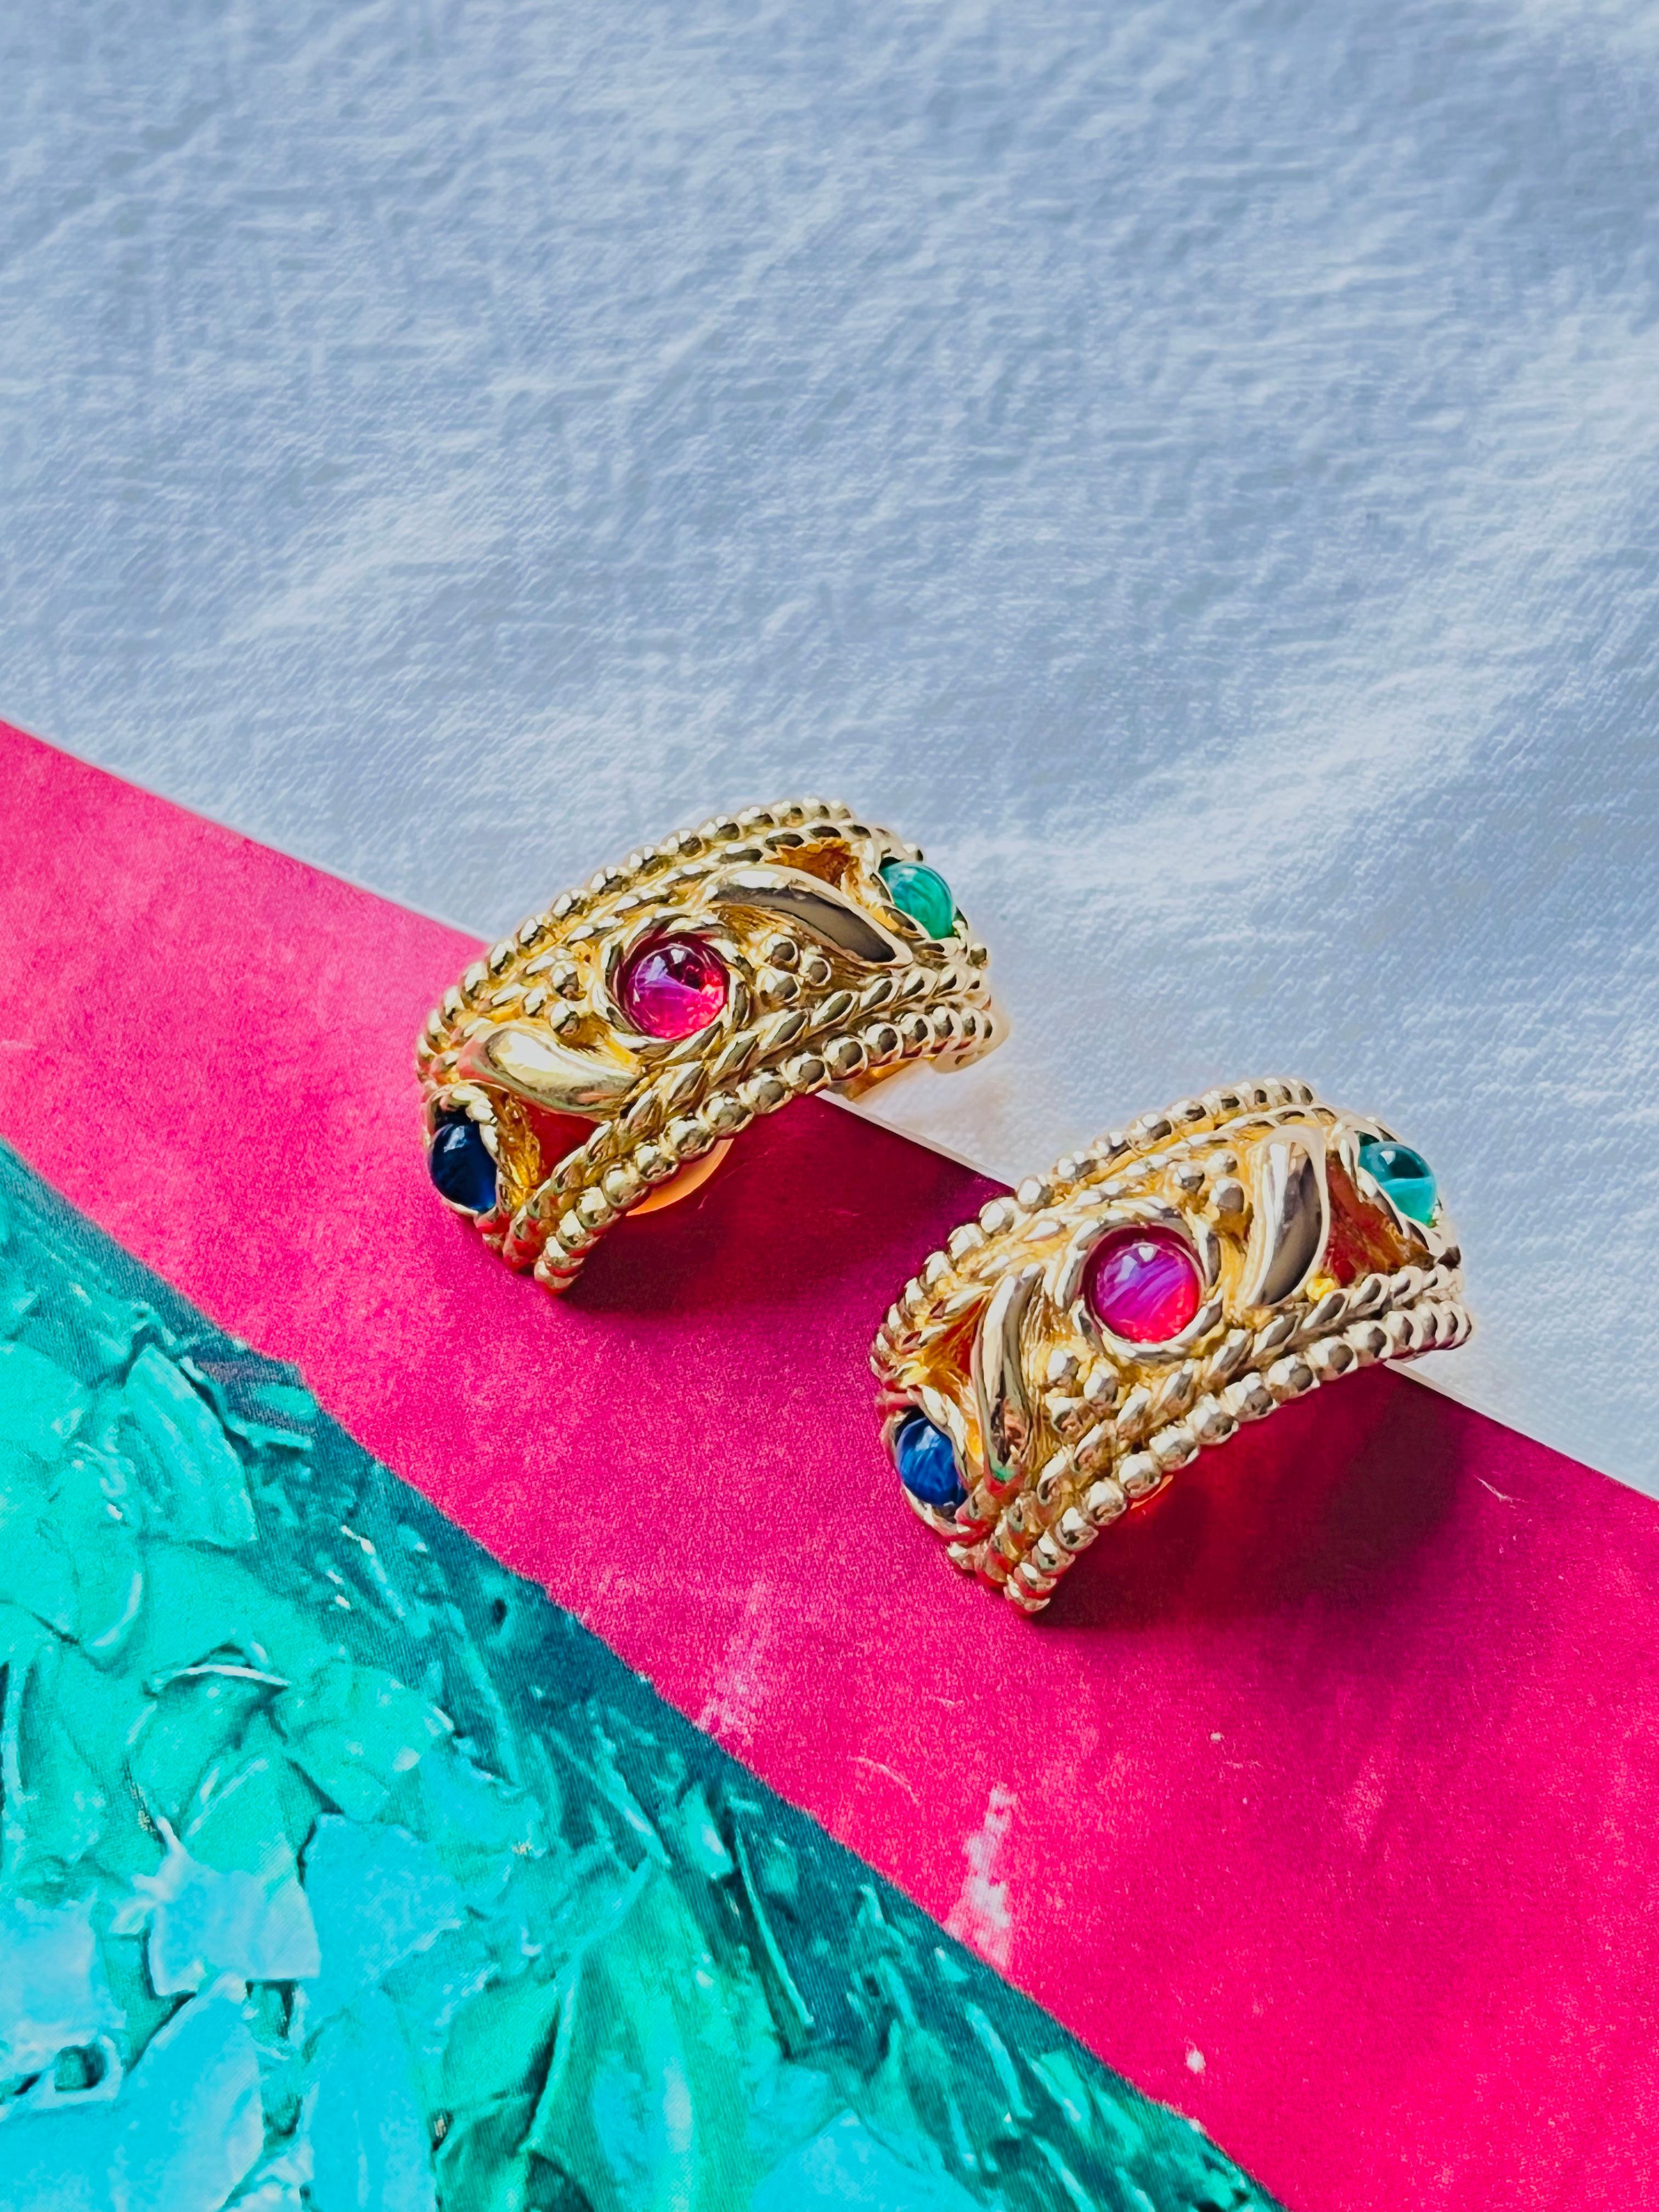 Christian Dior Vintage 1970s Baroque Gripoix Emerald Sapphire Ruby Dome Half Hoop Openwork Exquisite Clip Earrings, Gold Tone

Very excellent condition. Vintage and rare to find. 100% Genuine.

A very beautiful pair of clip on earrings by Chr. DIOR,